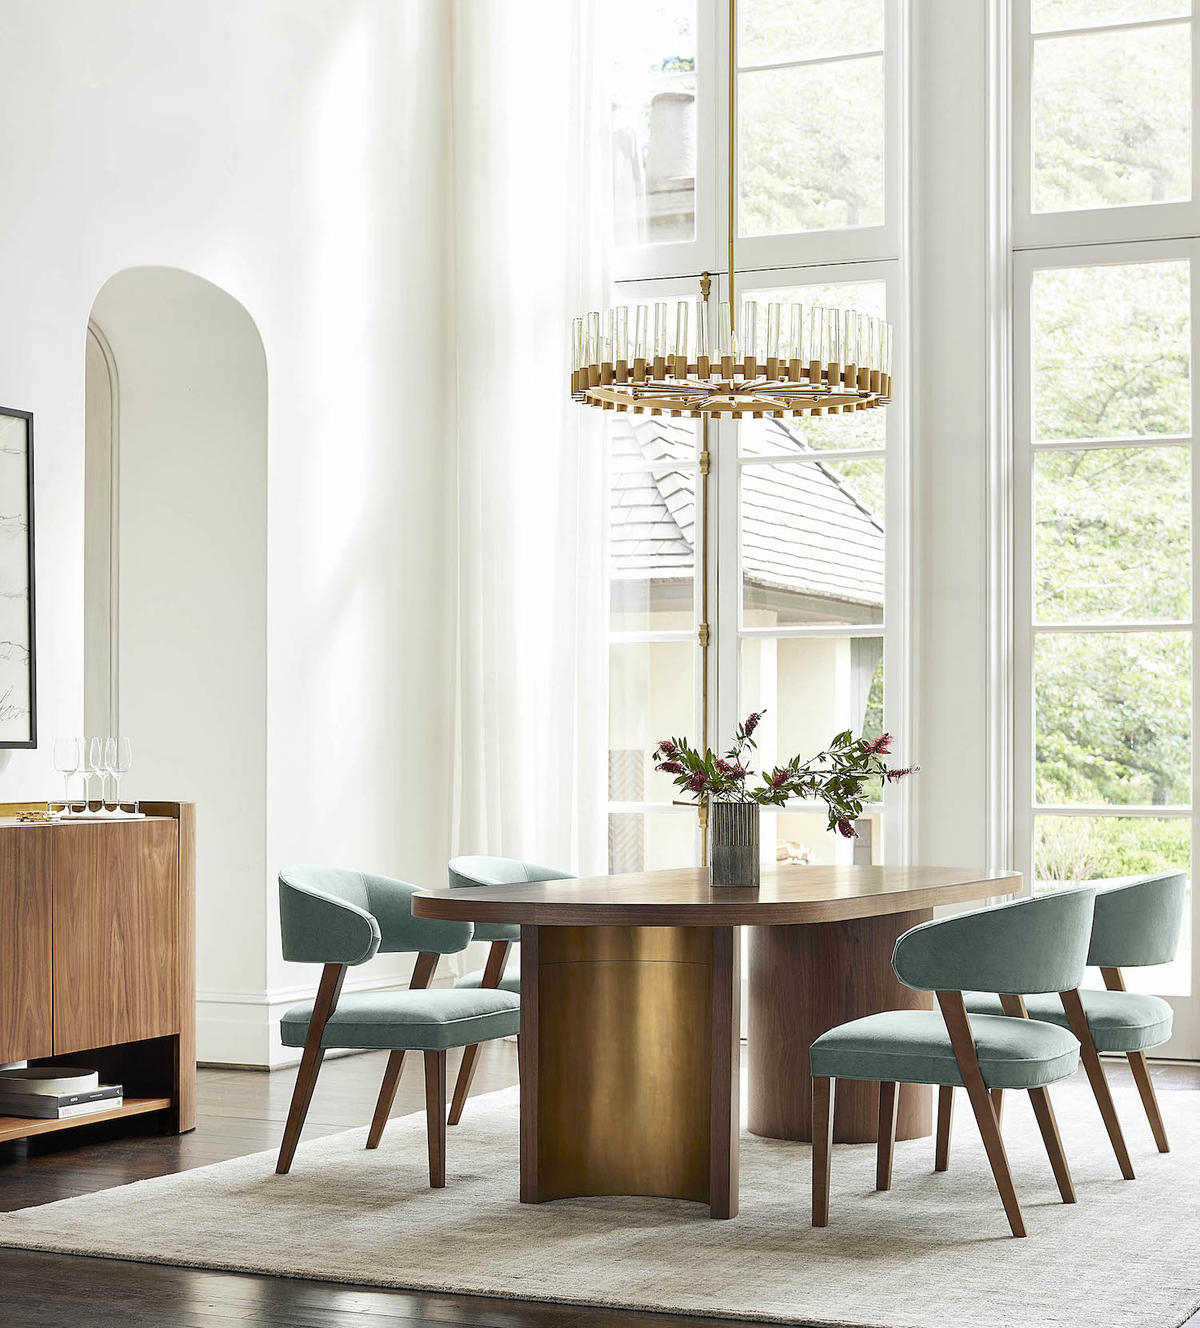 Brass is back—here are 8 pieces to warm up a neutral room